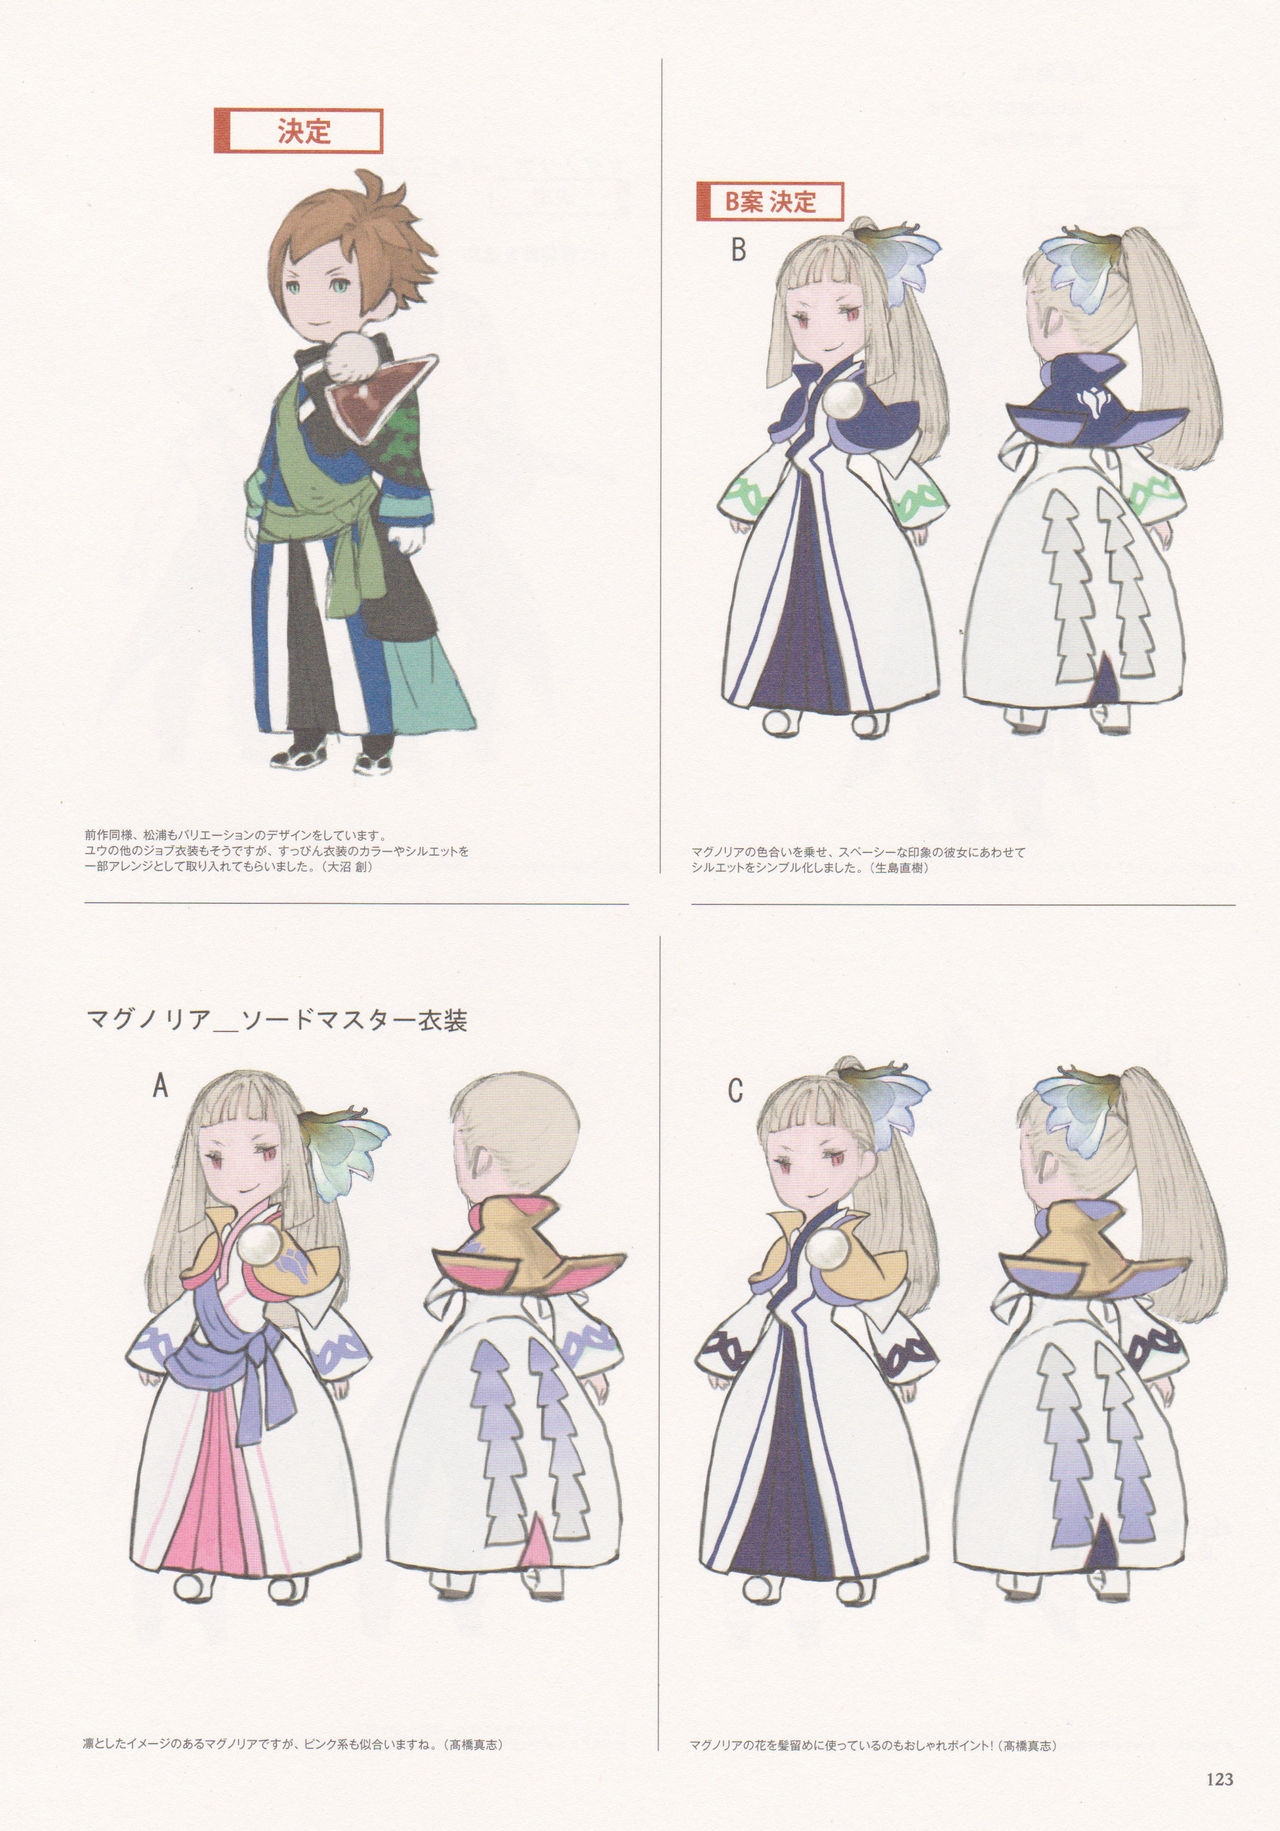 Bravely Second - End Layer - Design Works THE ART OF BRAVELY 2013-2015 123